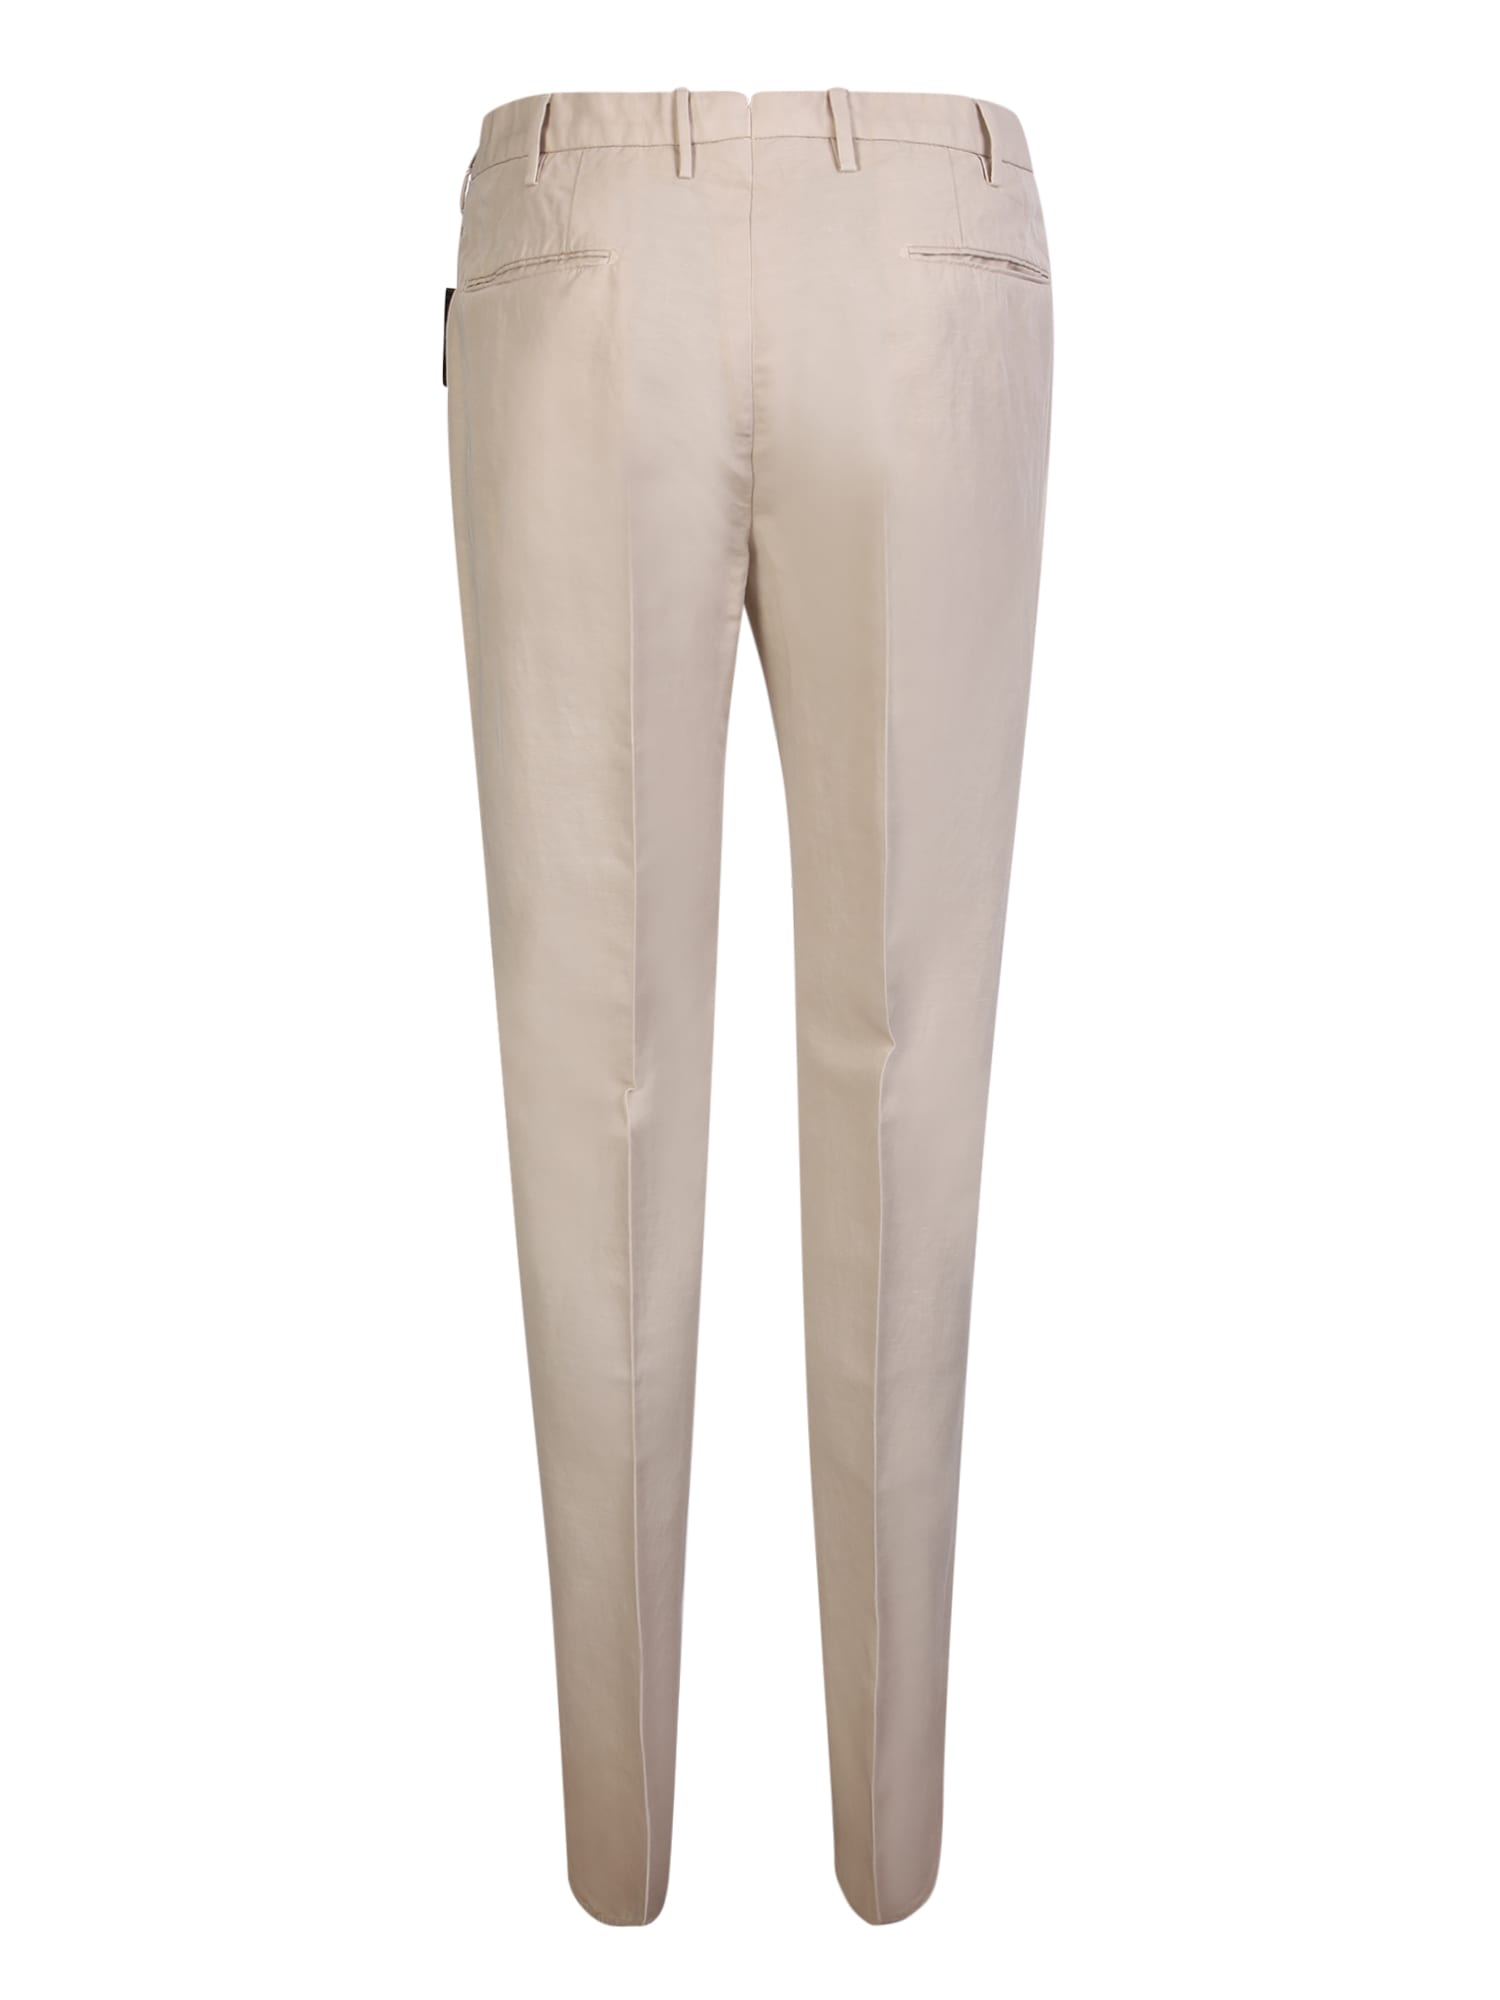 Shop Incotex Grey Tailored Trousers